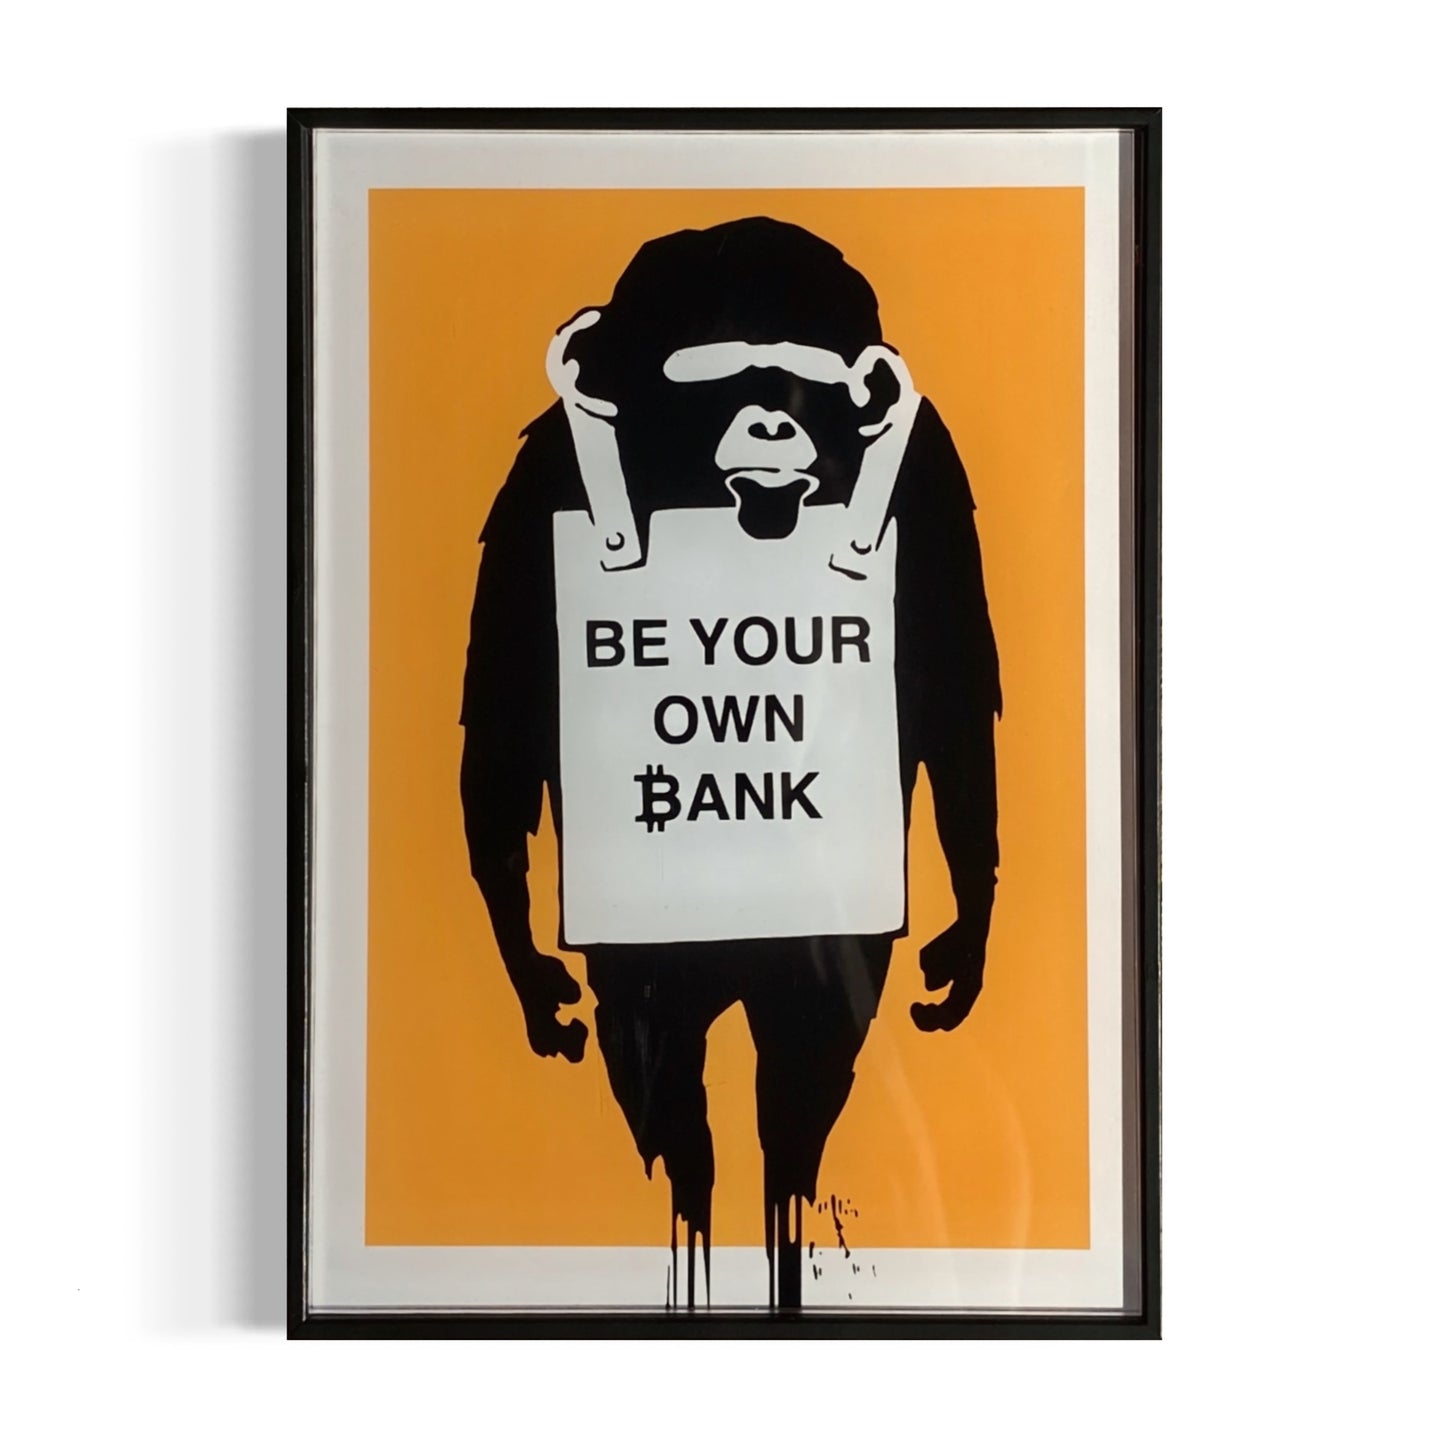 Fine Art Print on Acrylic Glass "Be Your Own Bank"